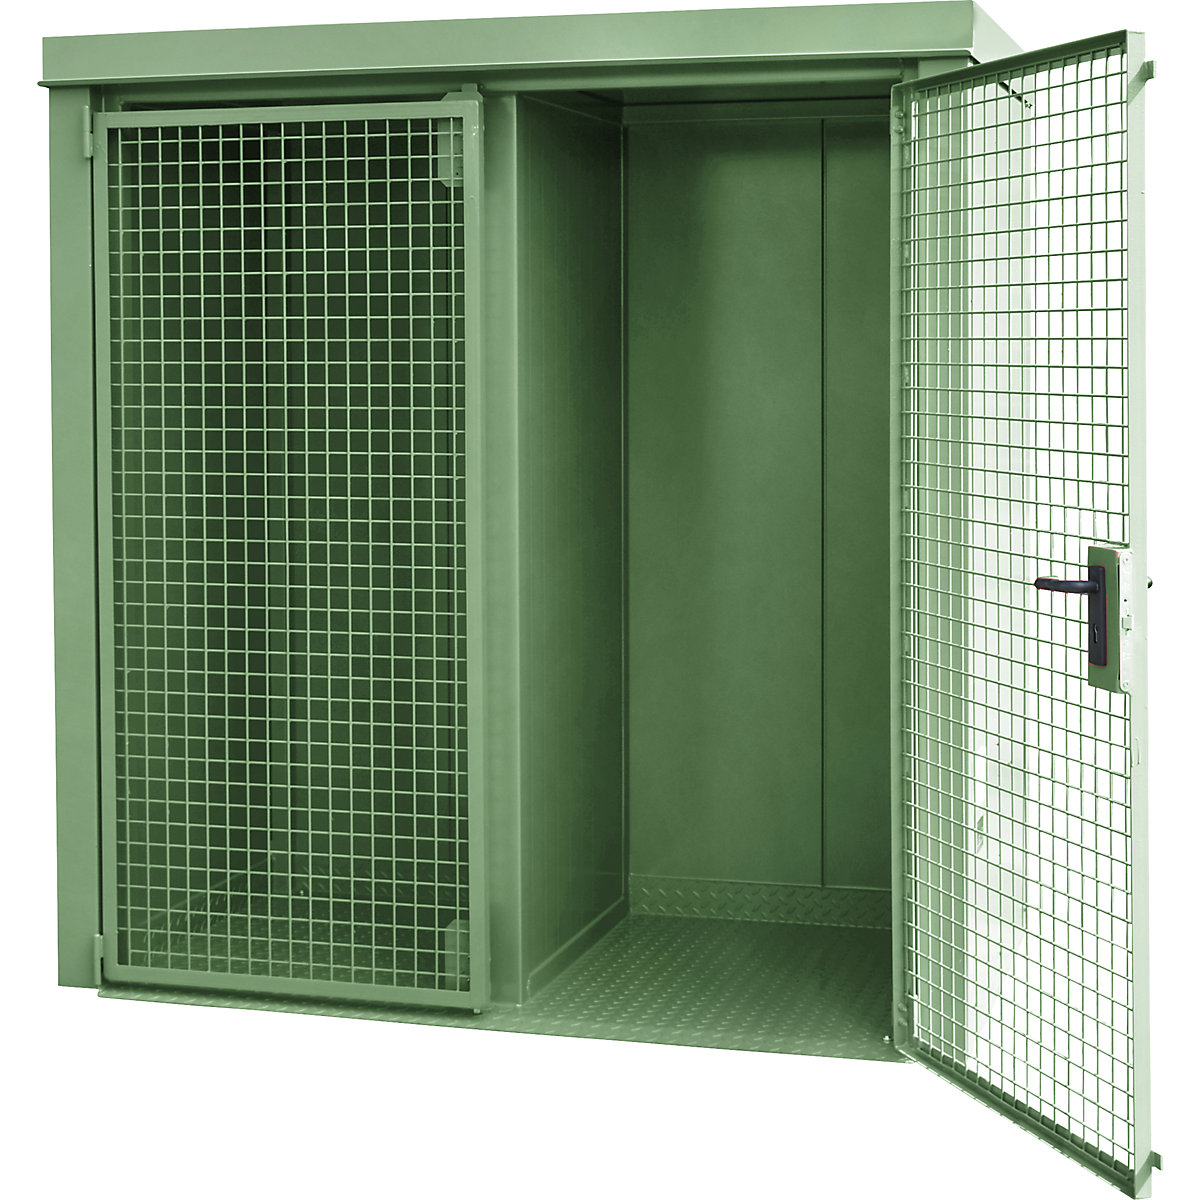 Gas cylinder container with divider, fire resistant – eurokraft pro, for 28 cylinders with Ø 230 mm, green-4